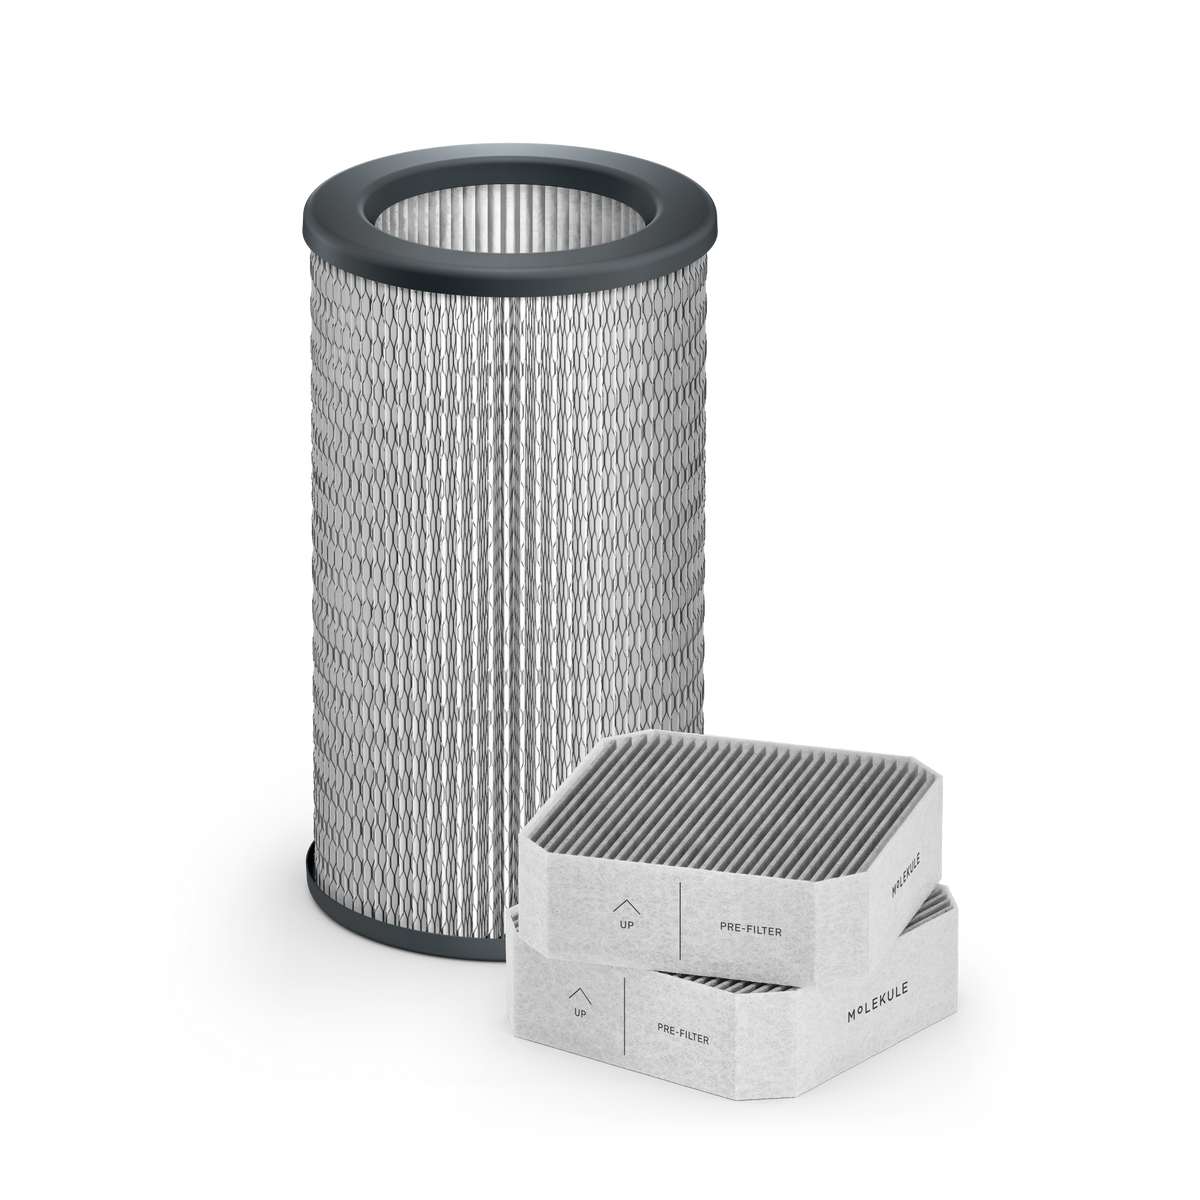 One Air PECO-Filter and two Air pre-filters